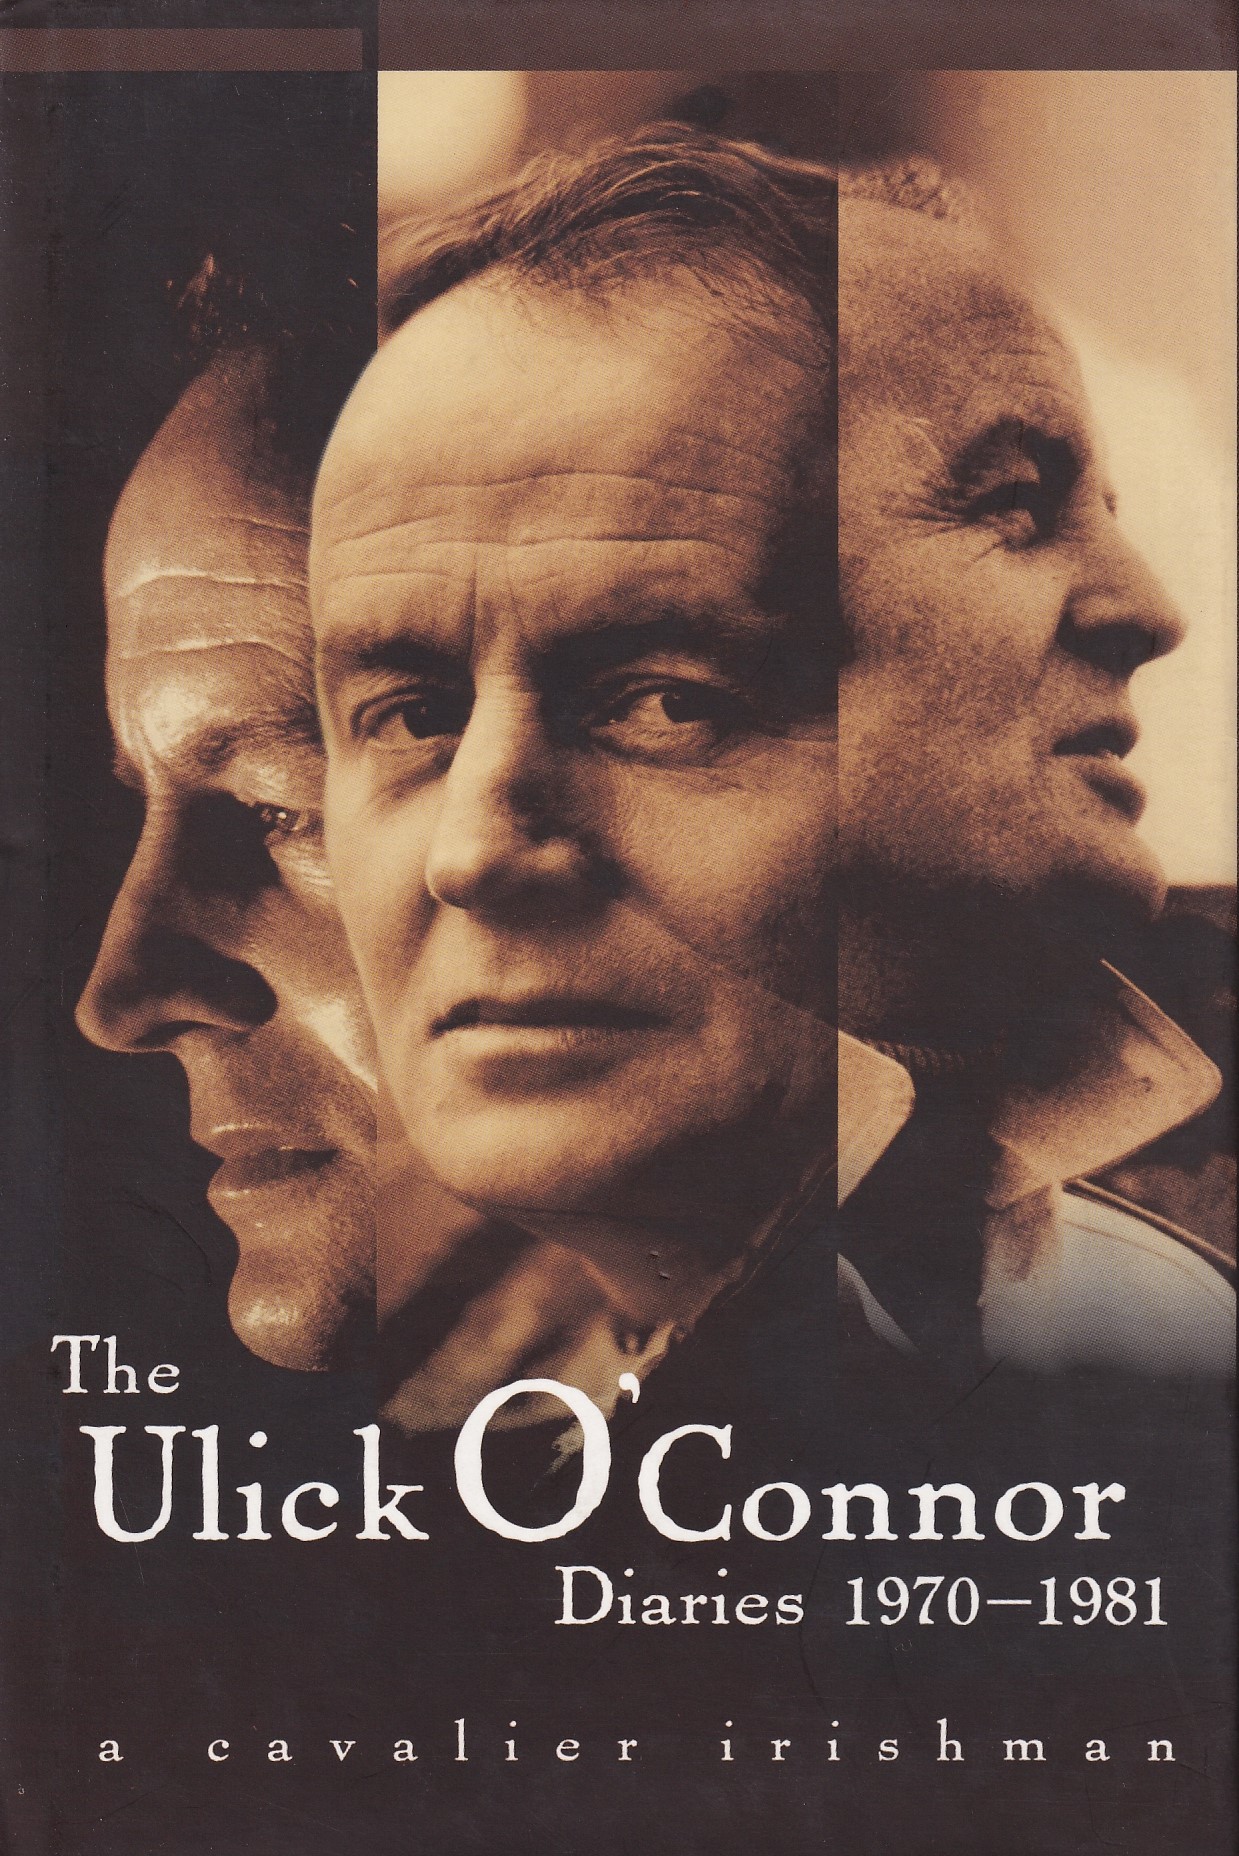 The Ulick O’Connor Diaries, 1970-1981: A Cavalier Irishman | Ulick O'Connor | Charlie Byrne's